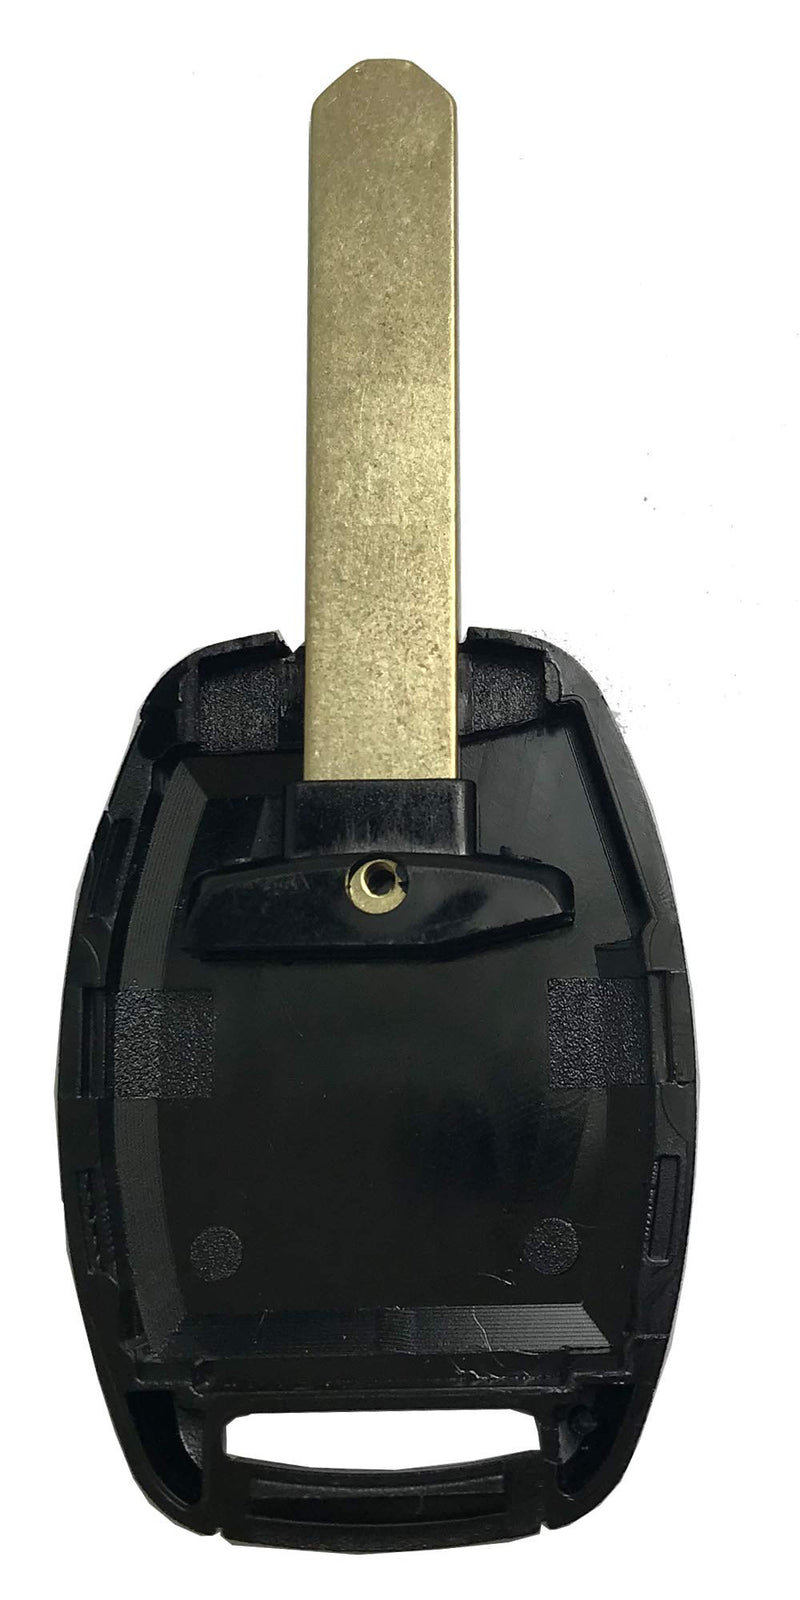  [AUSTRALIA] - Horande Replacement Key Fob Case fits for 2006 2007 2008 2009 2010 2011 Honda Accord Civic CRV Pilot Ridgeline Odyssey Keyless Entry Remote Key Fob Shell Cover 2+1 Button 2+1 Replacement Case